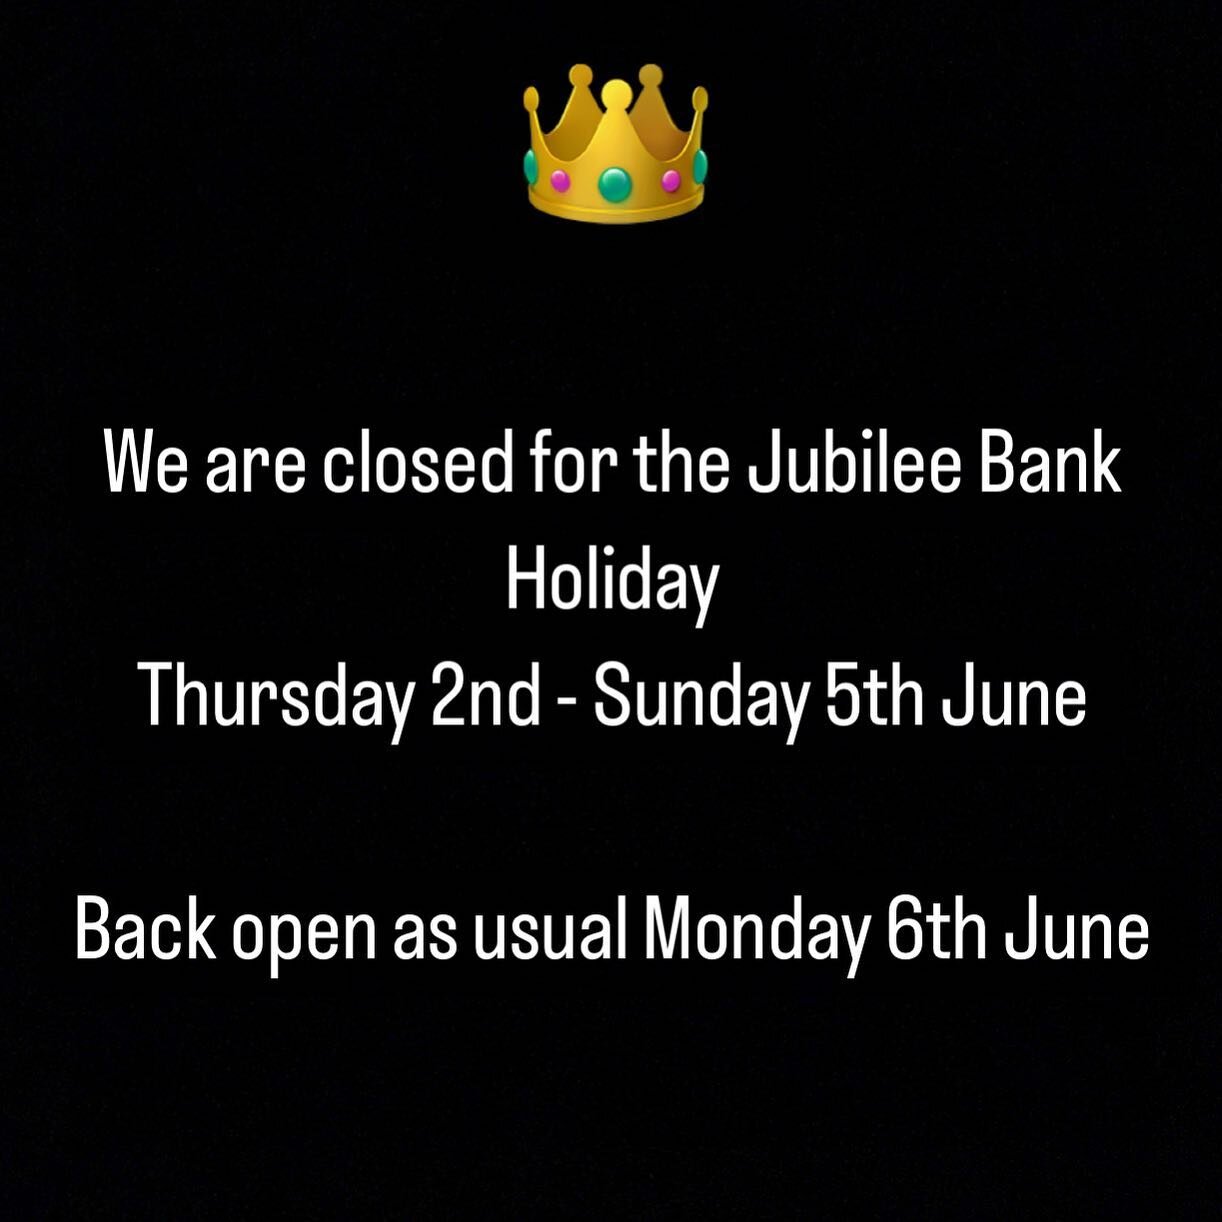 ☀️Our opening hours over the Jubilee bank holiday☀️

Make sure you have a lovely weekend 😎 keep healthy 🌸